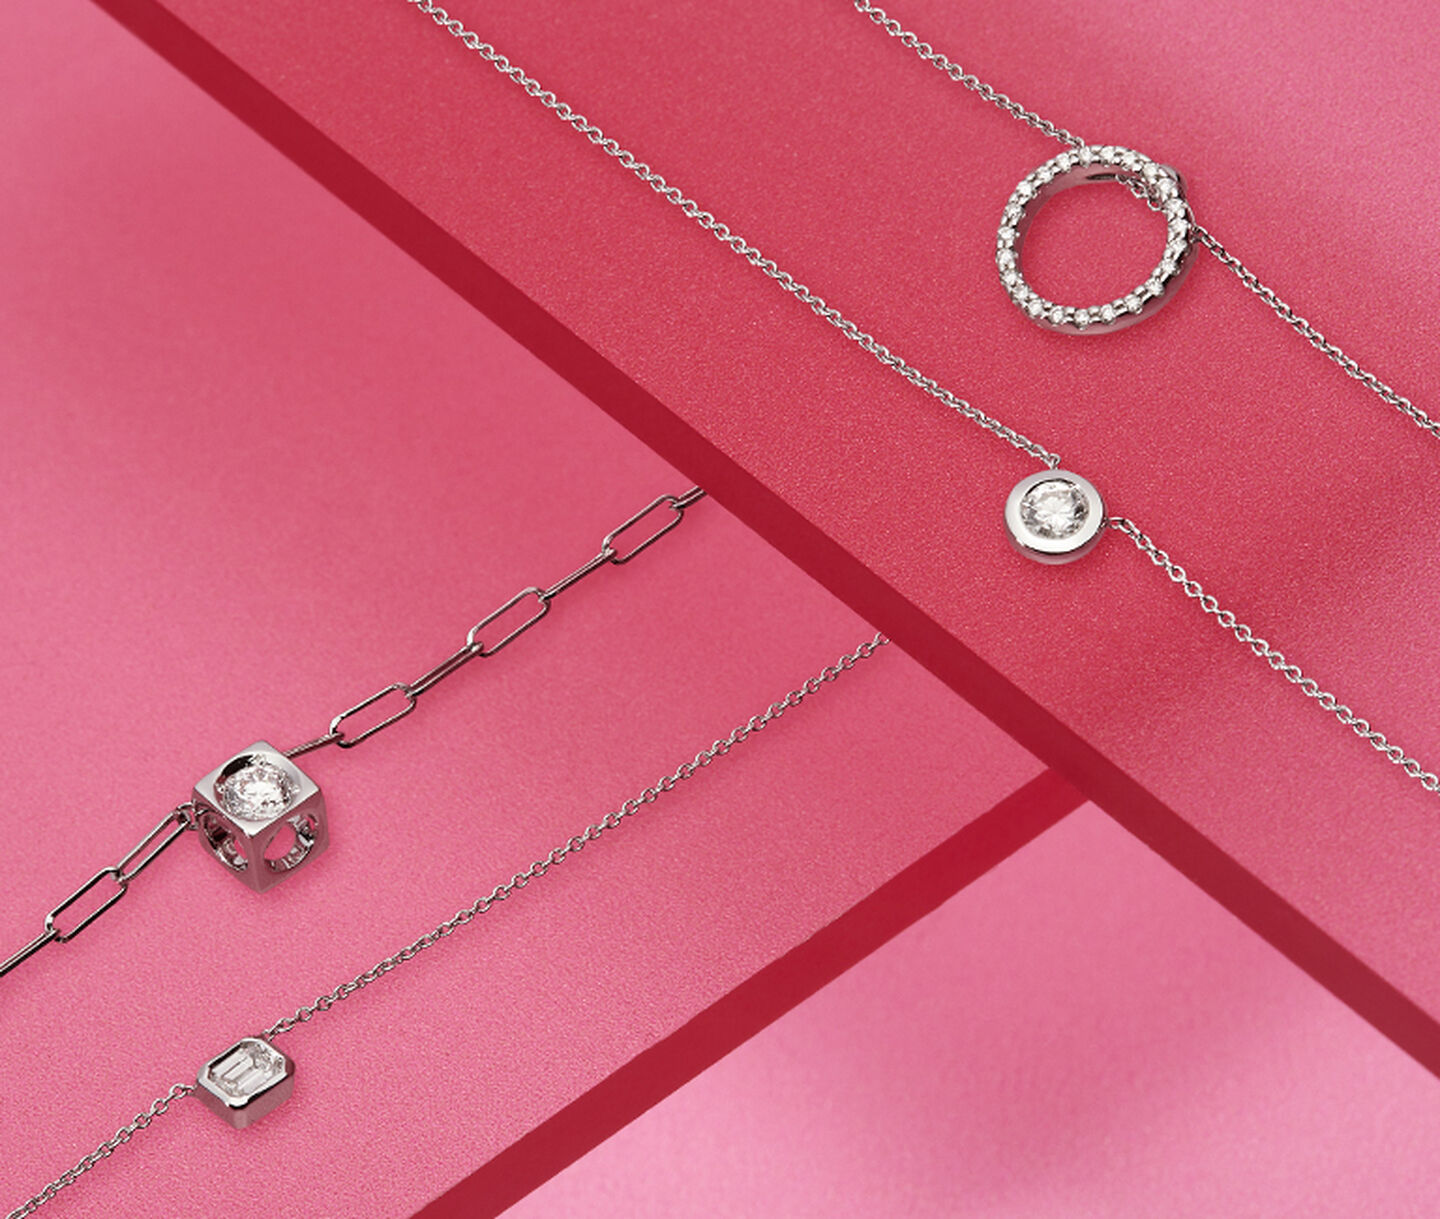 Diamond necklaces and bracelets on a red background